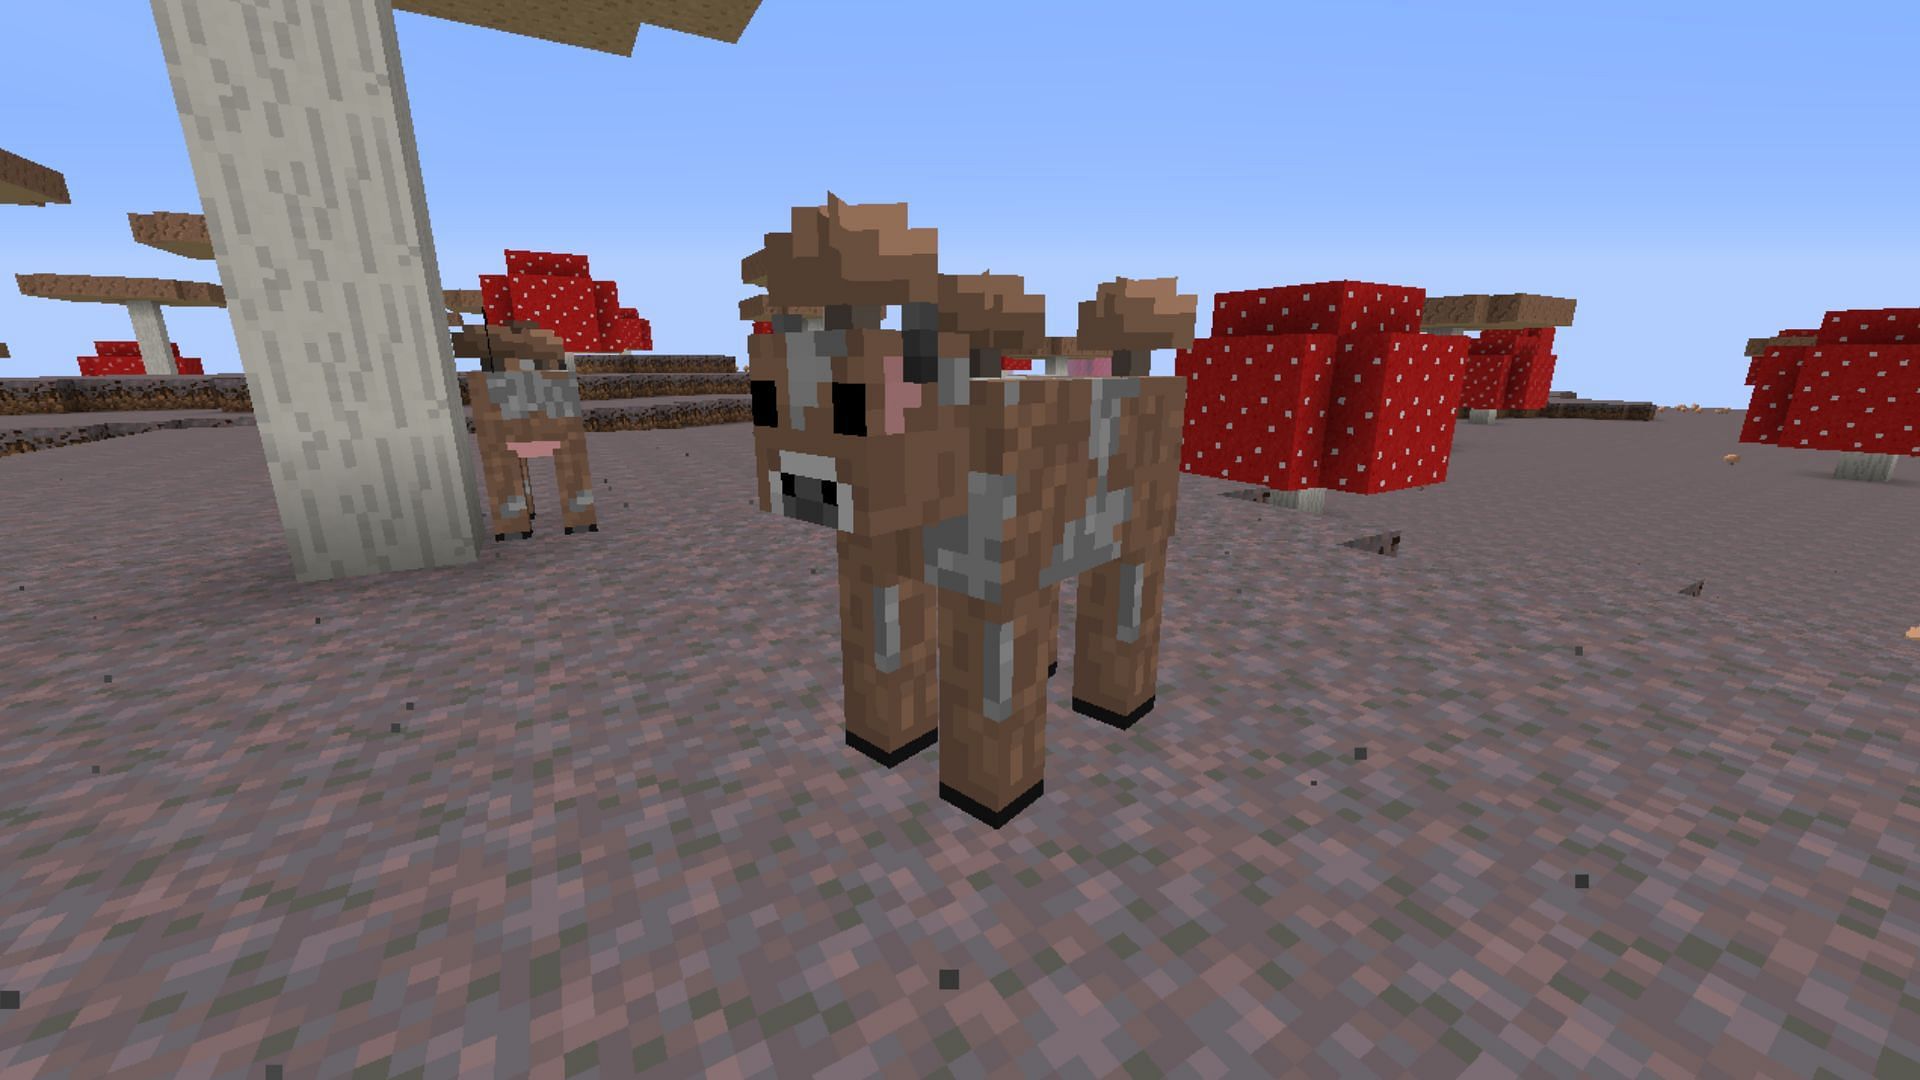 Brown Mooshroom is another rare mob that spawns on a rare biome in Minecraft (Image via Reddit / u/blackdragon6547)